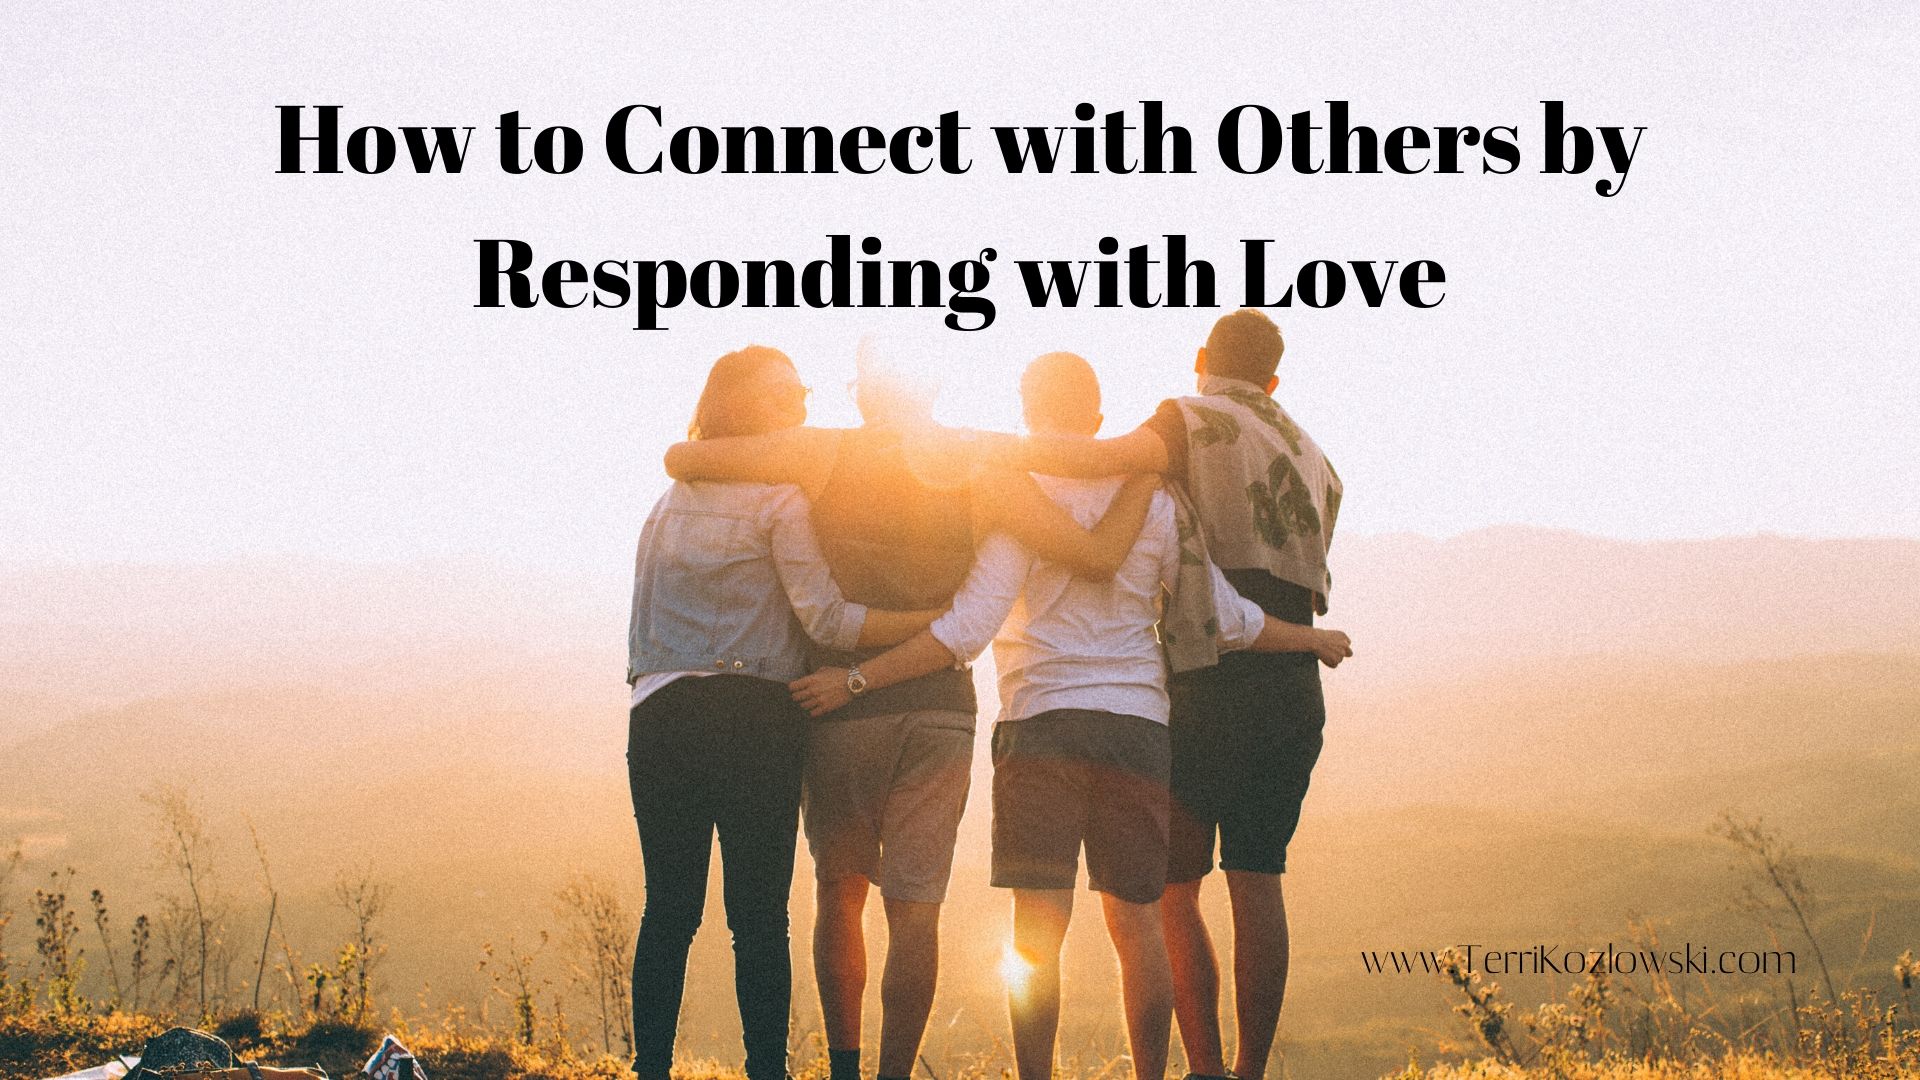 Respond with Love